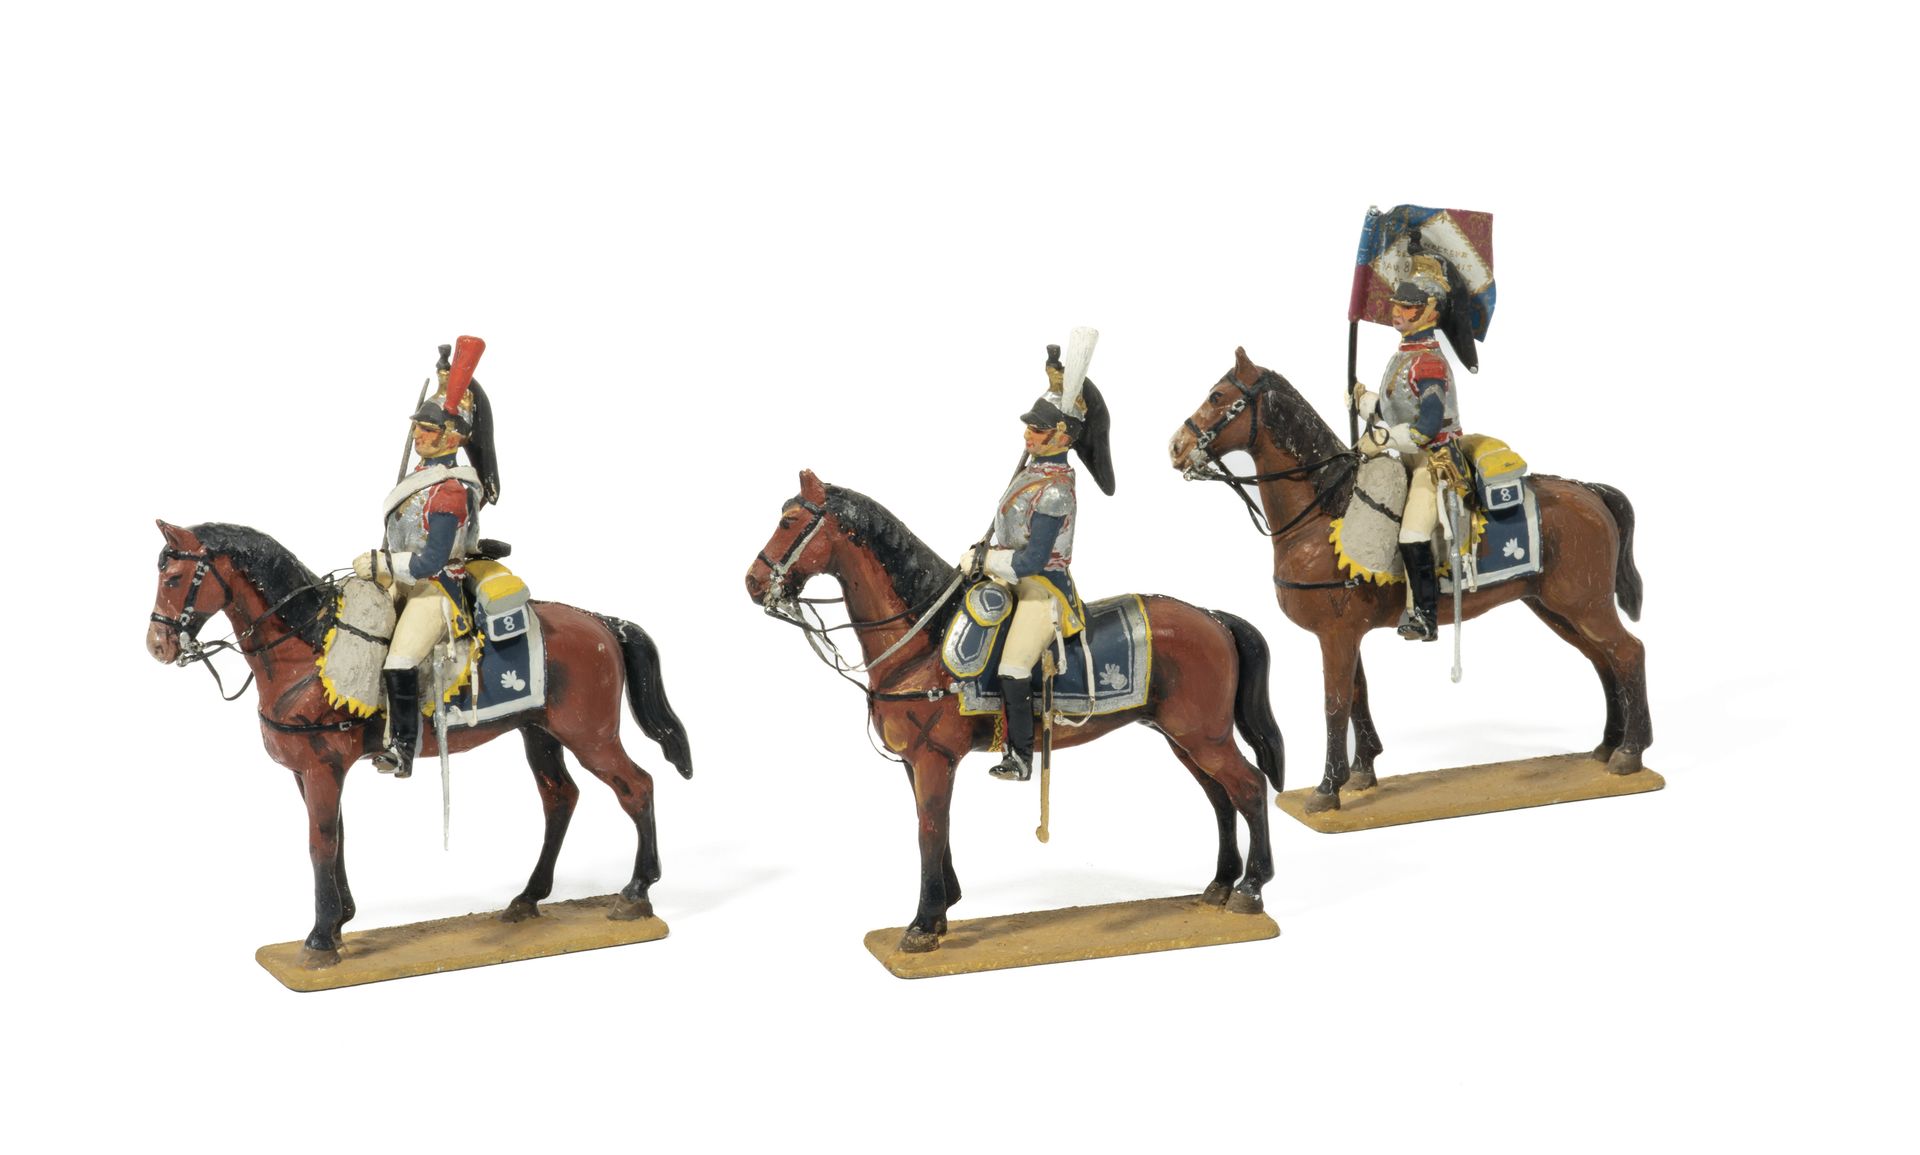 Null Metayer. The Cuirassiers. The 8th Regiment. 1 officer, 1 standard and 1 sol&hellip;